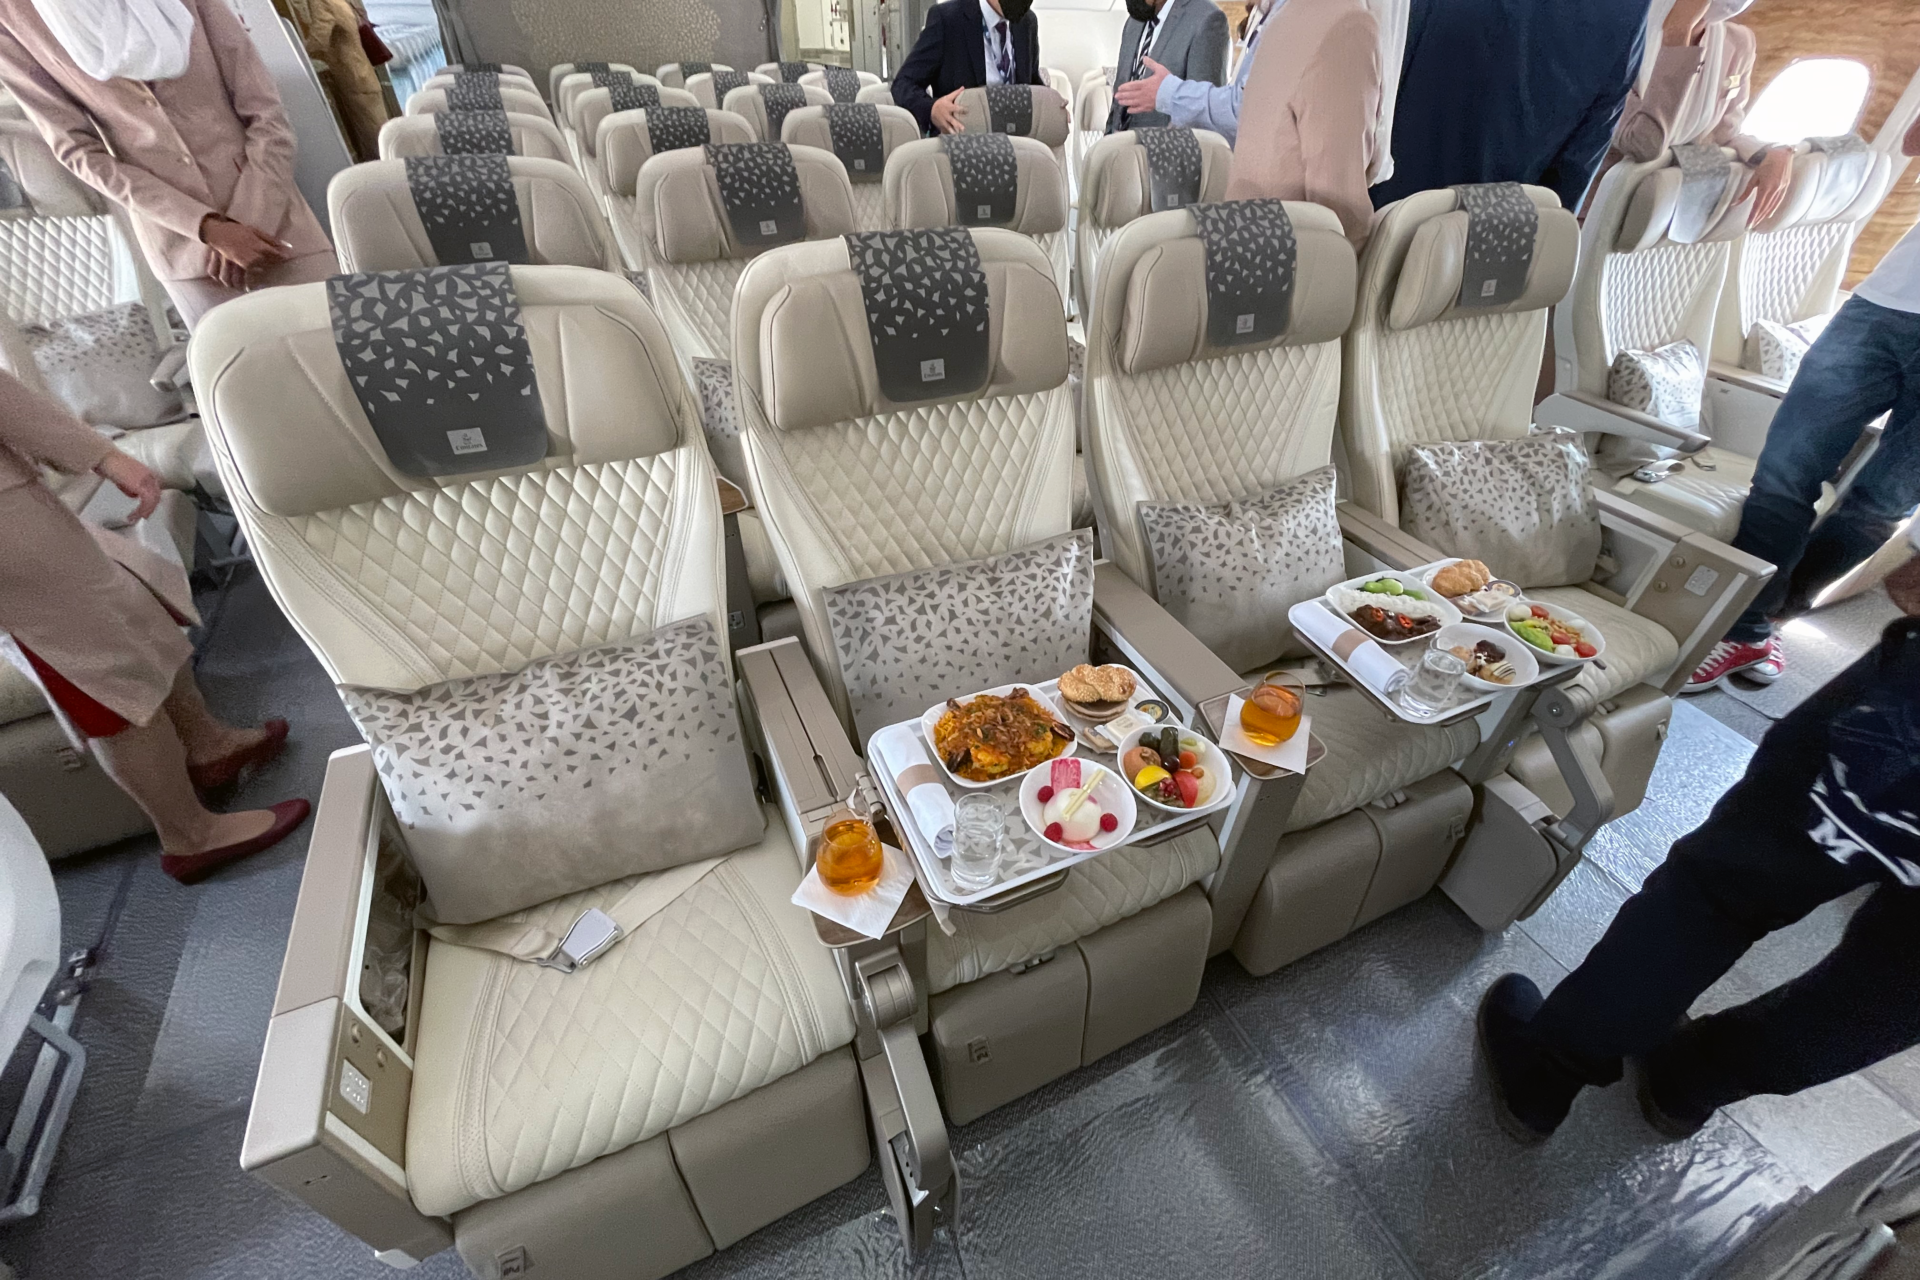 Emirates, Airbus A380, Guided Tour